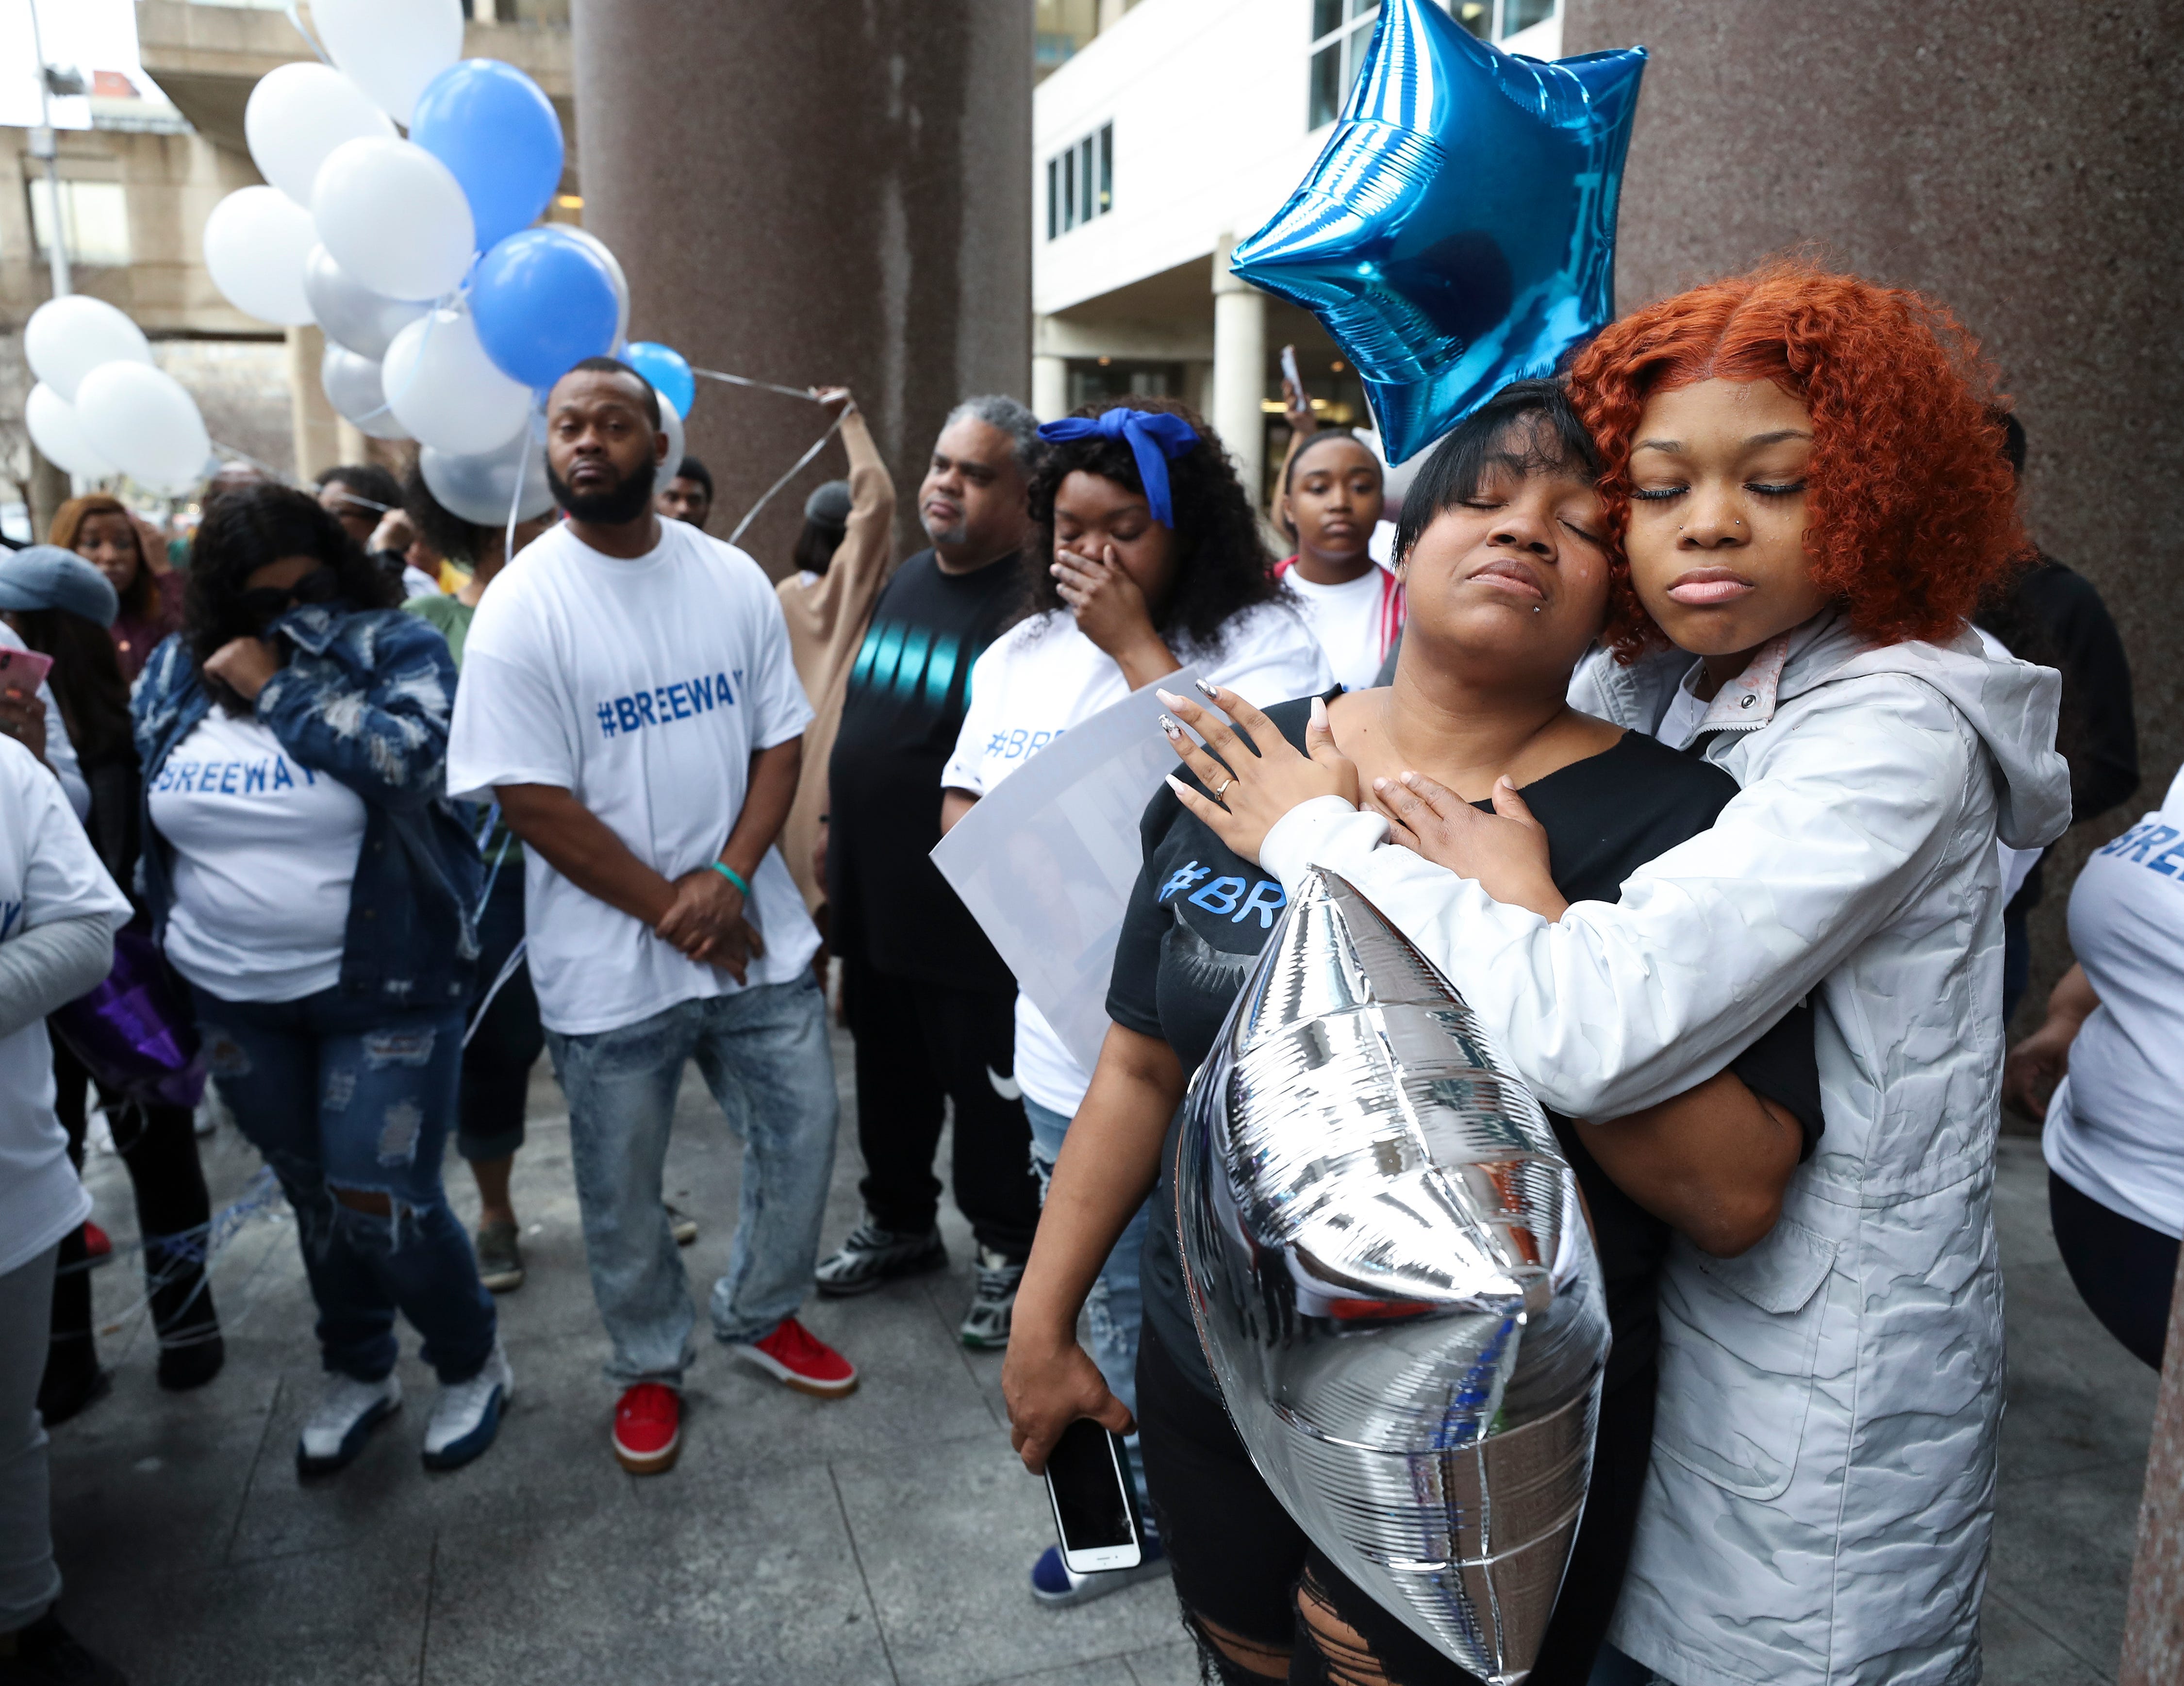 Tamika Palmer, left, embraced her daughter Juniyah Palmer during a vigil for her other daughter, Breonna Taylor, outside the Judicial Center in downtown Louisville, Ky. on Mar. 19, 2020.  Taylor was killed during an officer-involved shooting last week.  The family chose the vigil site because it is across the street from the Louisville Metro Police Department.

1-Vigil01 Sam [Via MerlinFTP Drop]